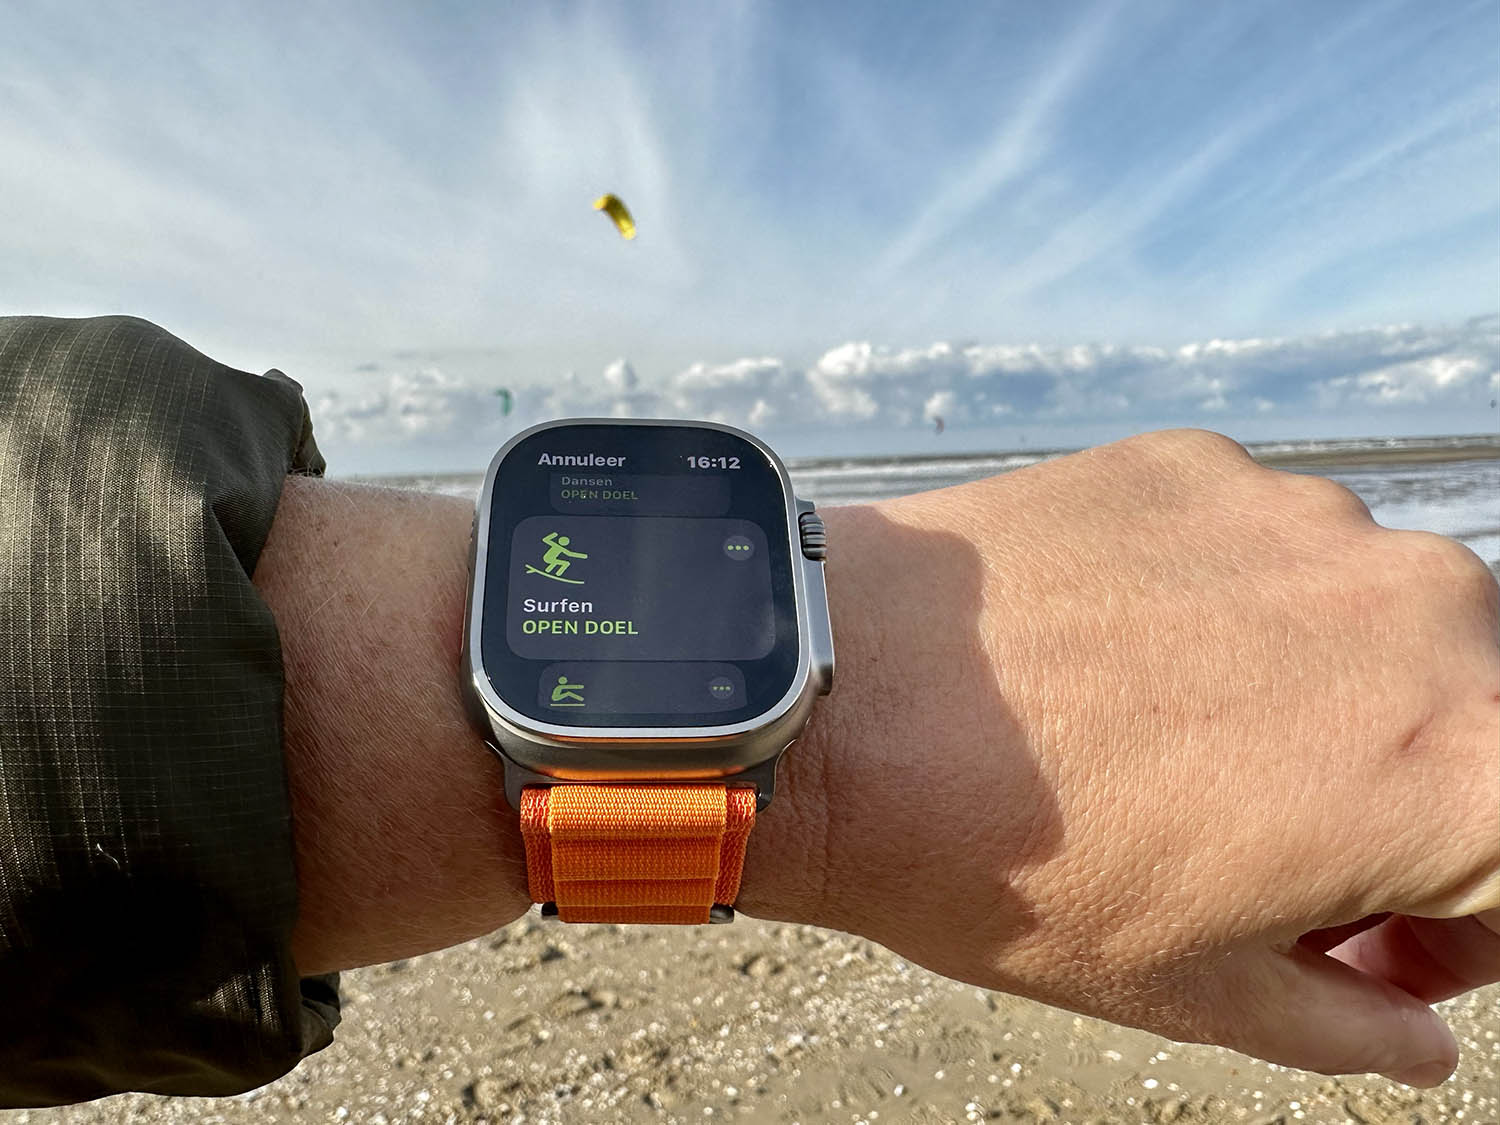 Apple Watch Ultra review